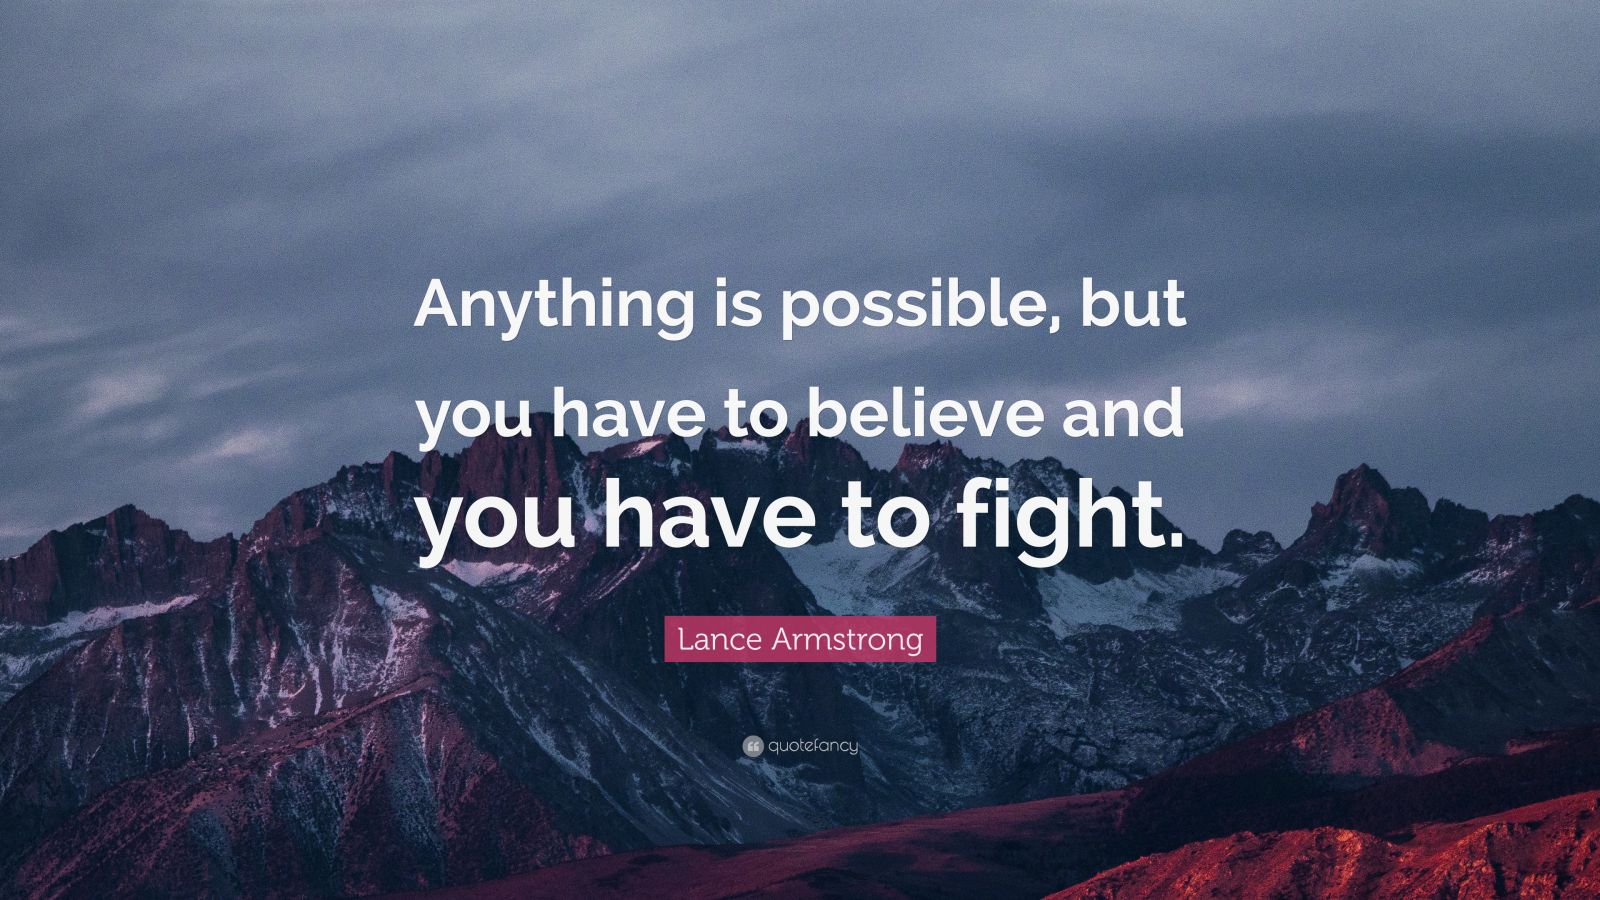 "anything is possible, but you have to believe and you have to